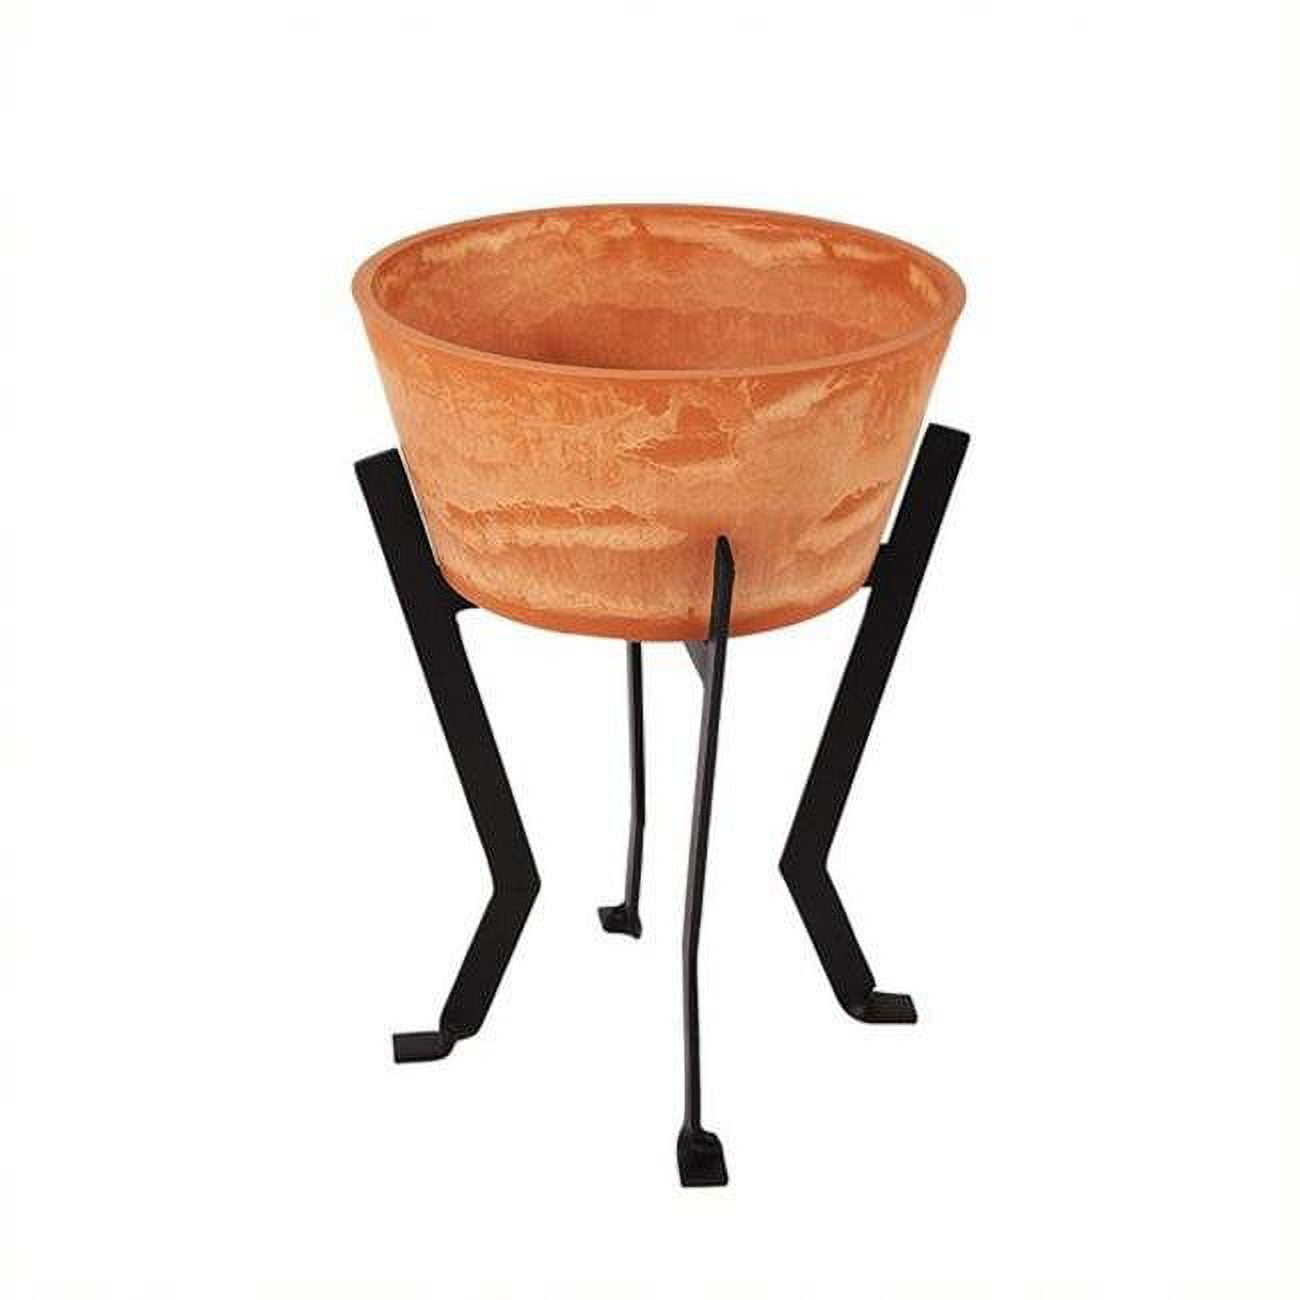 Achla Fb-58-s Denise Planter Ii With Stand, Terracotta